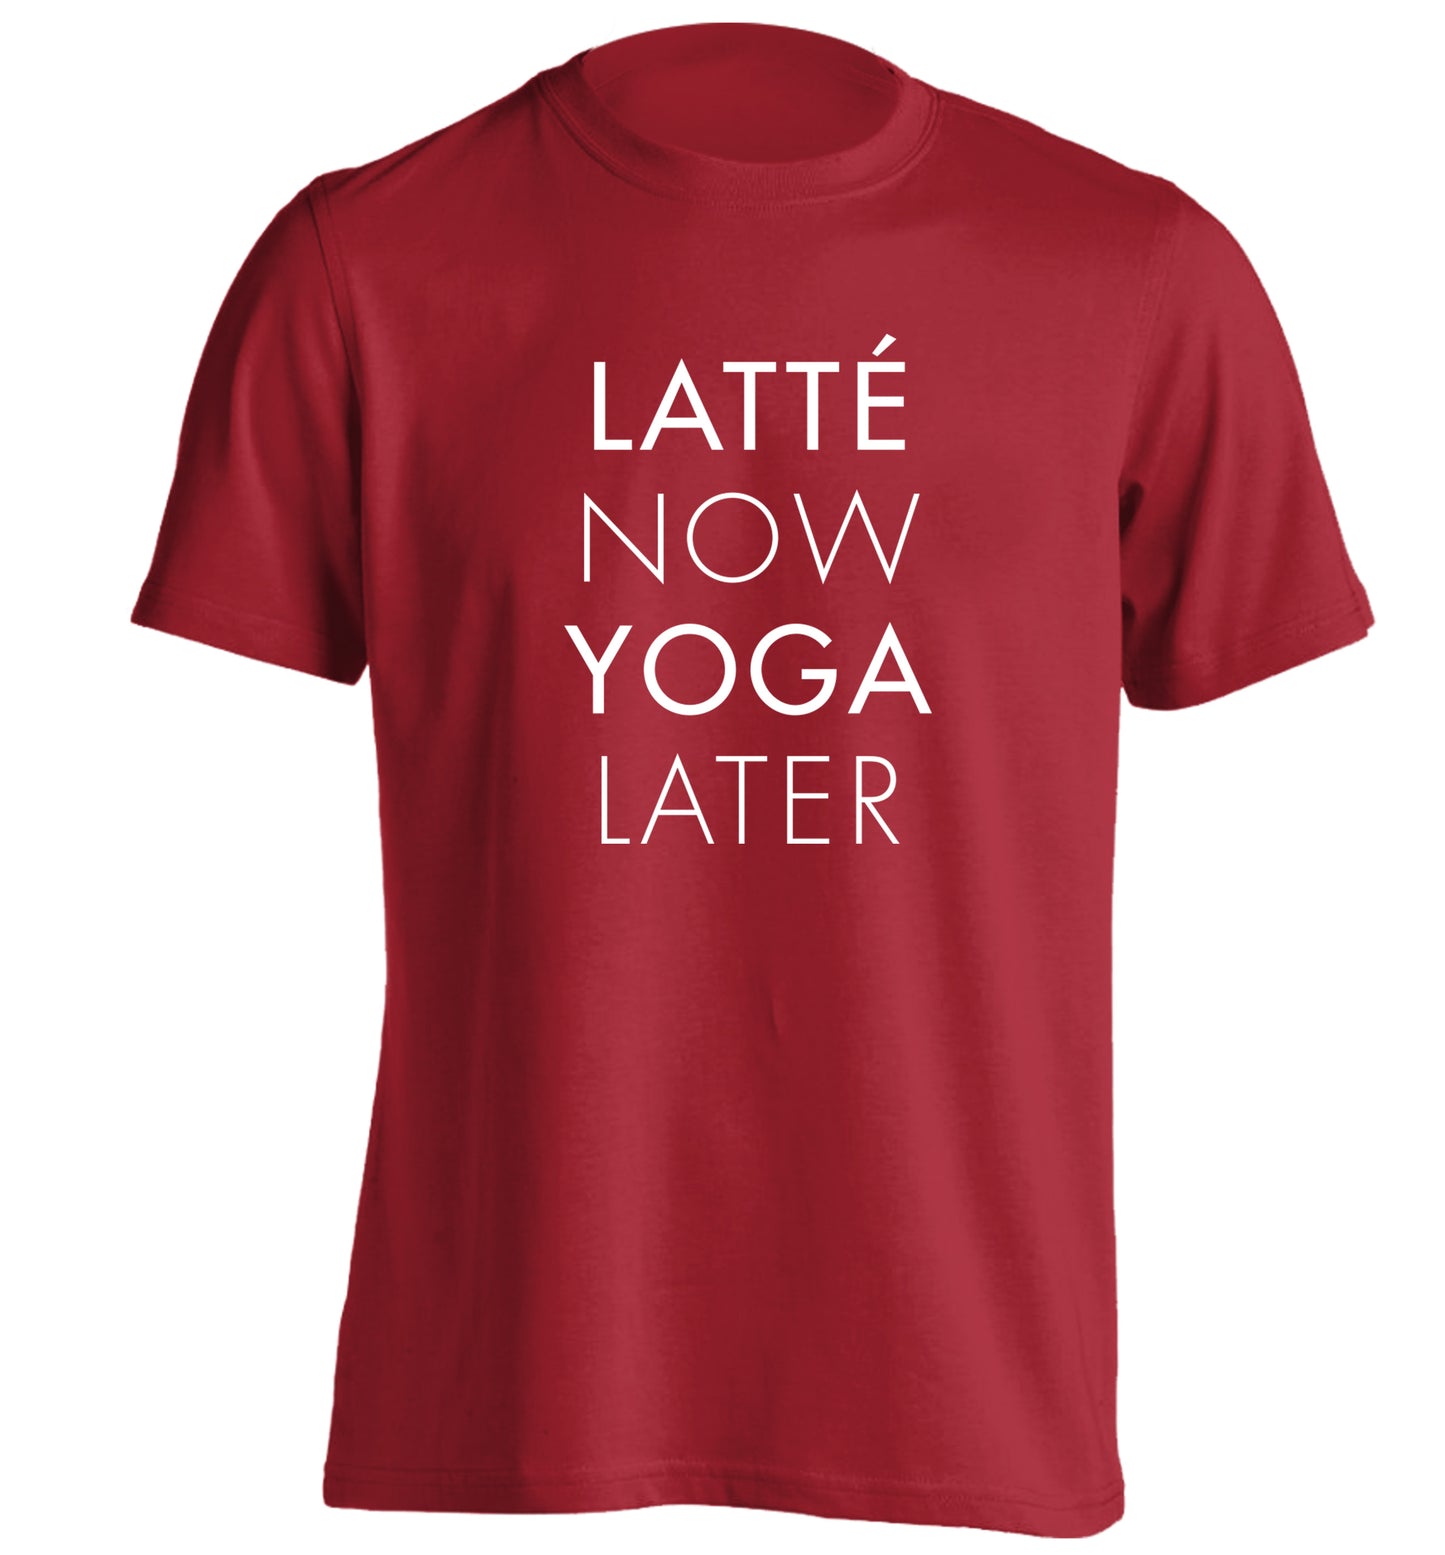 Latte now yoga later adults unisex red Tshirt 2XL